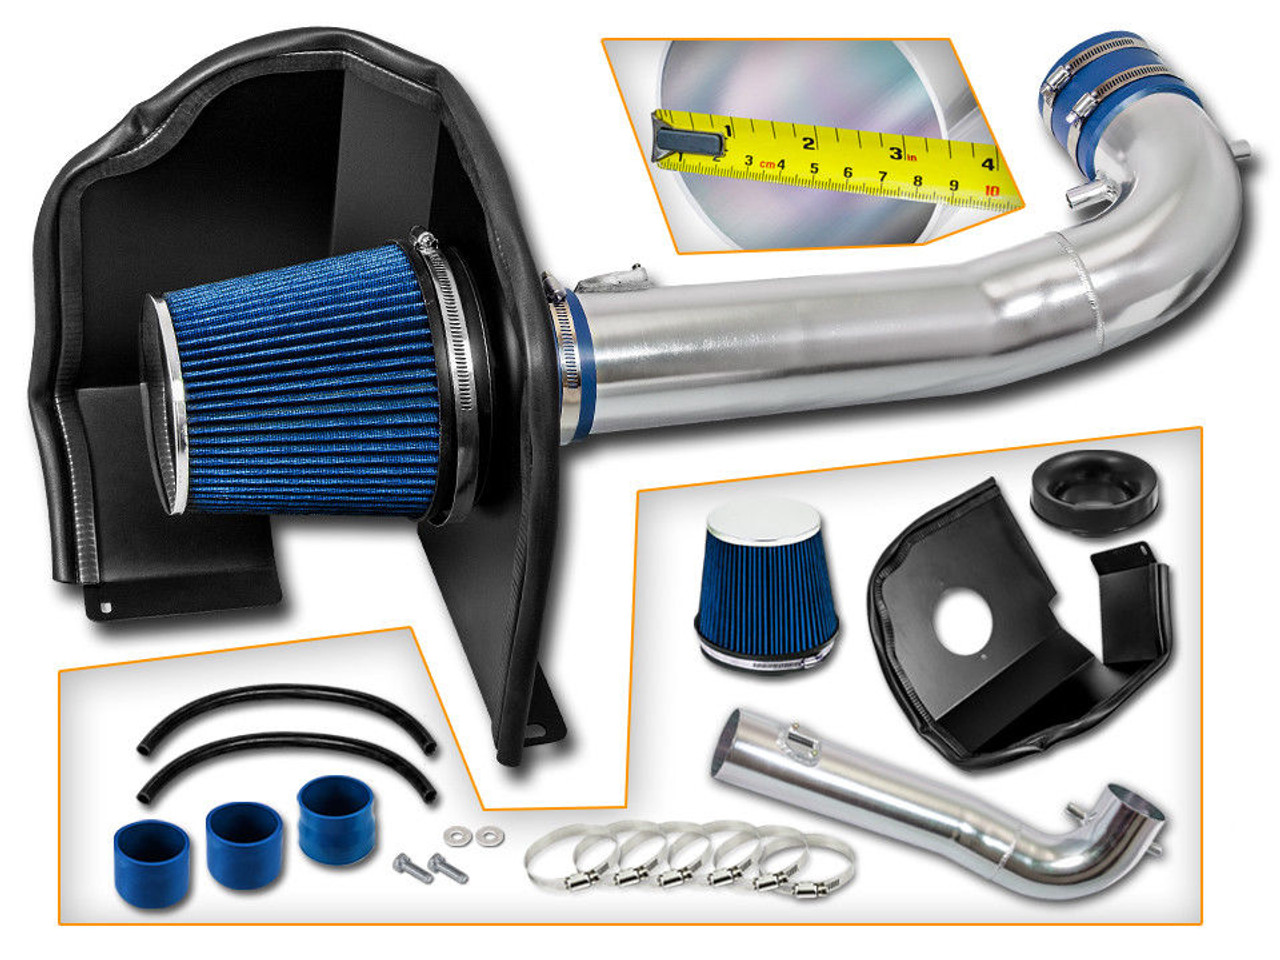 Cold Air Intake Kit for GMC Sierra 1500 (2014-2019) with 5.3L / 6.2L V8 Engine Blue 2019 Gmc Sierra 1500 Cold Air Intake